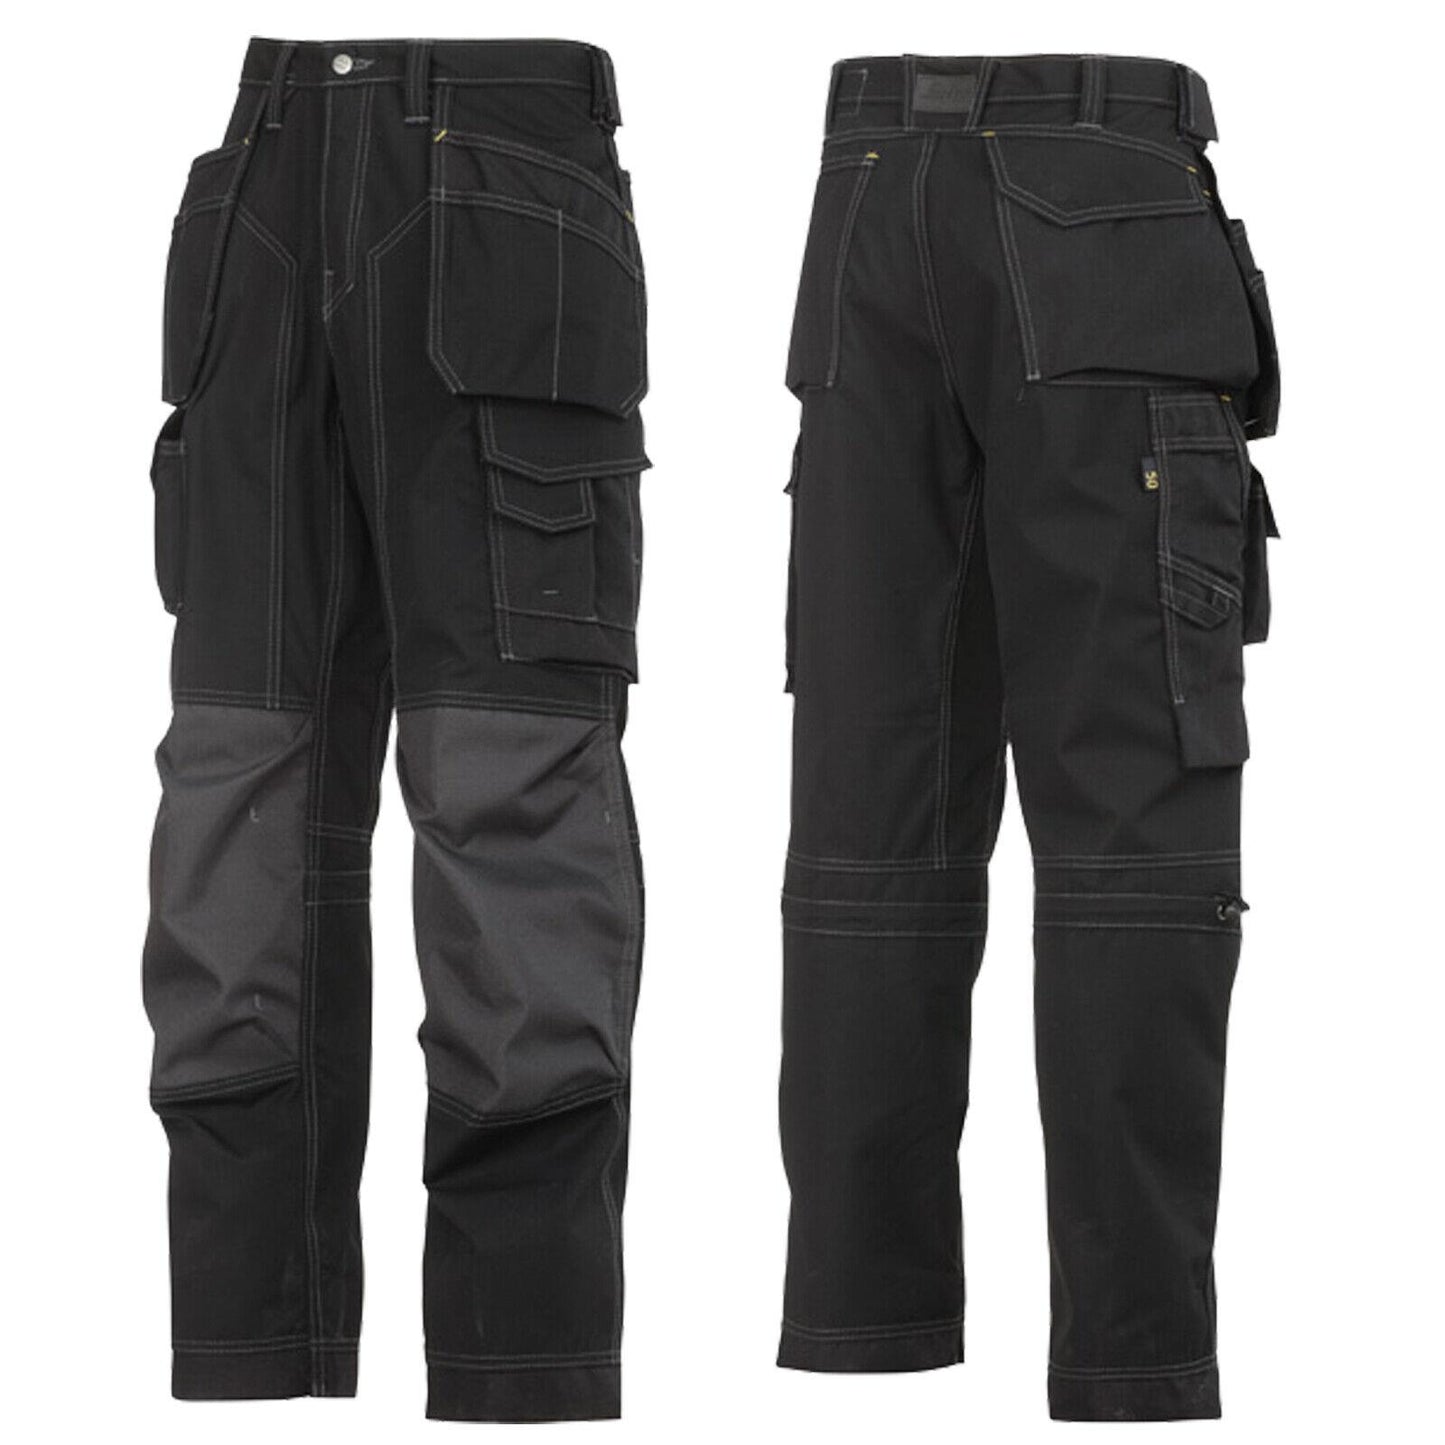 Snickers Workwear Floorlayer, Rip Stop Holster Pocket Trousers Black & Grey 3223